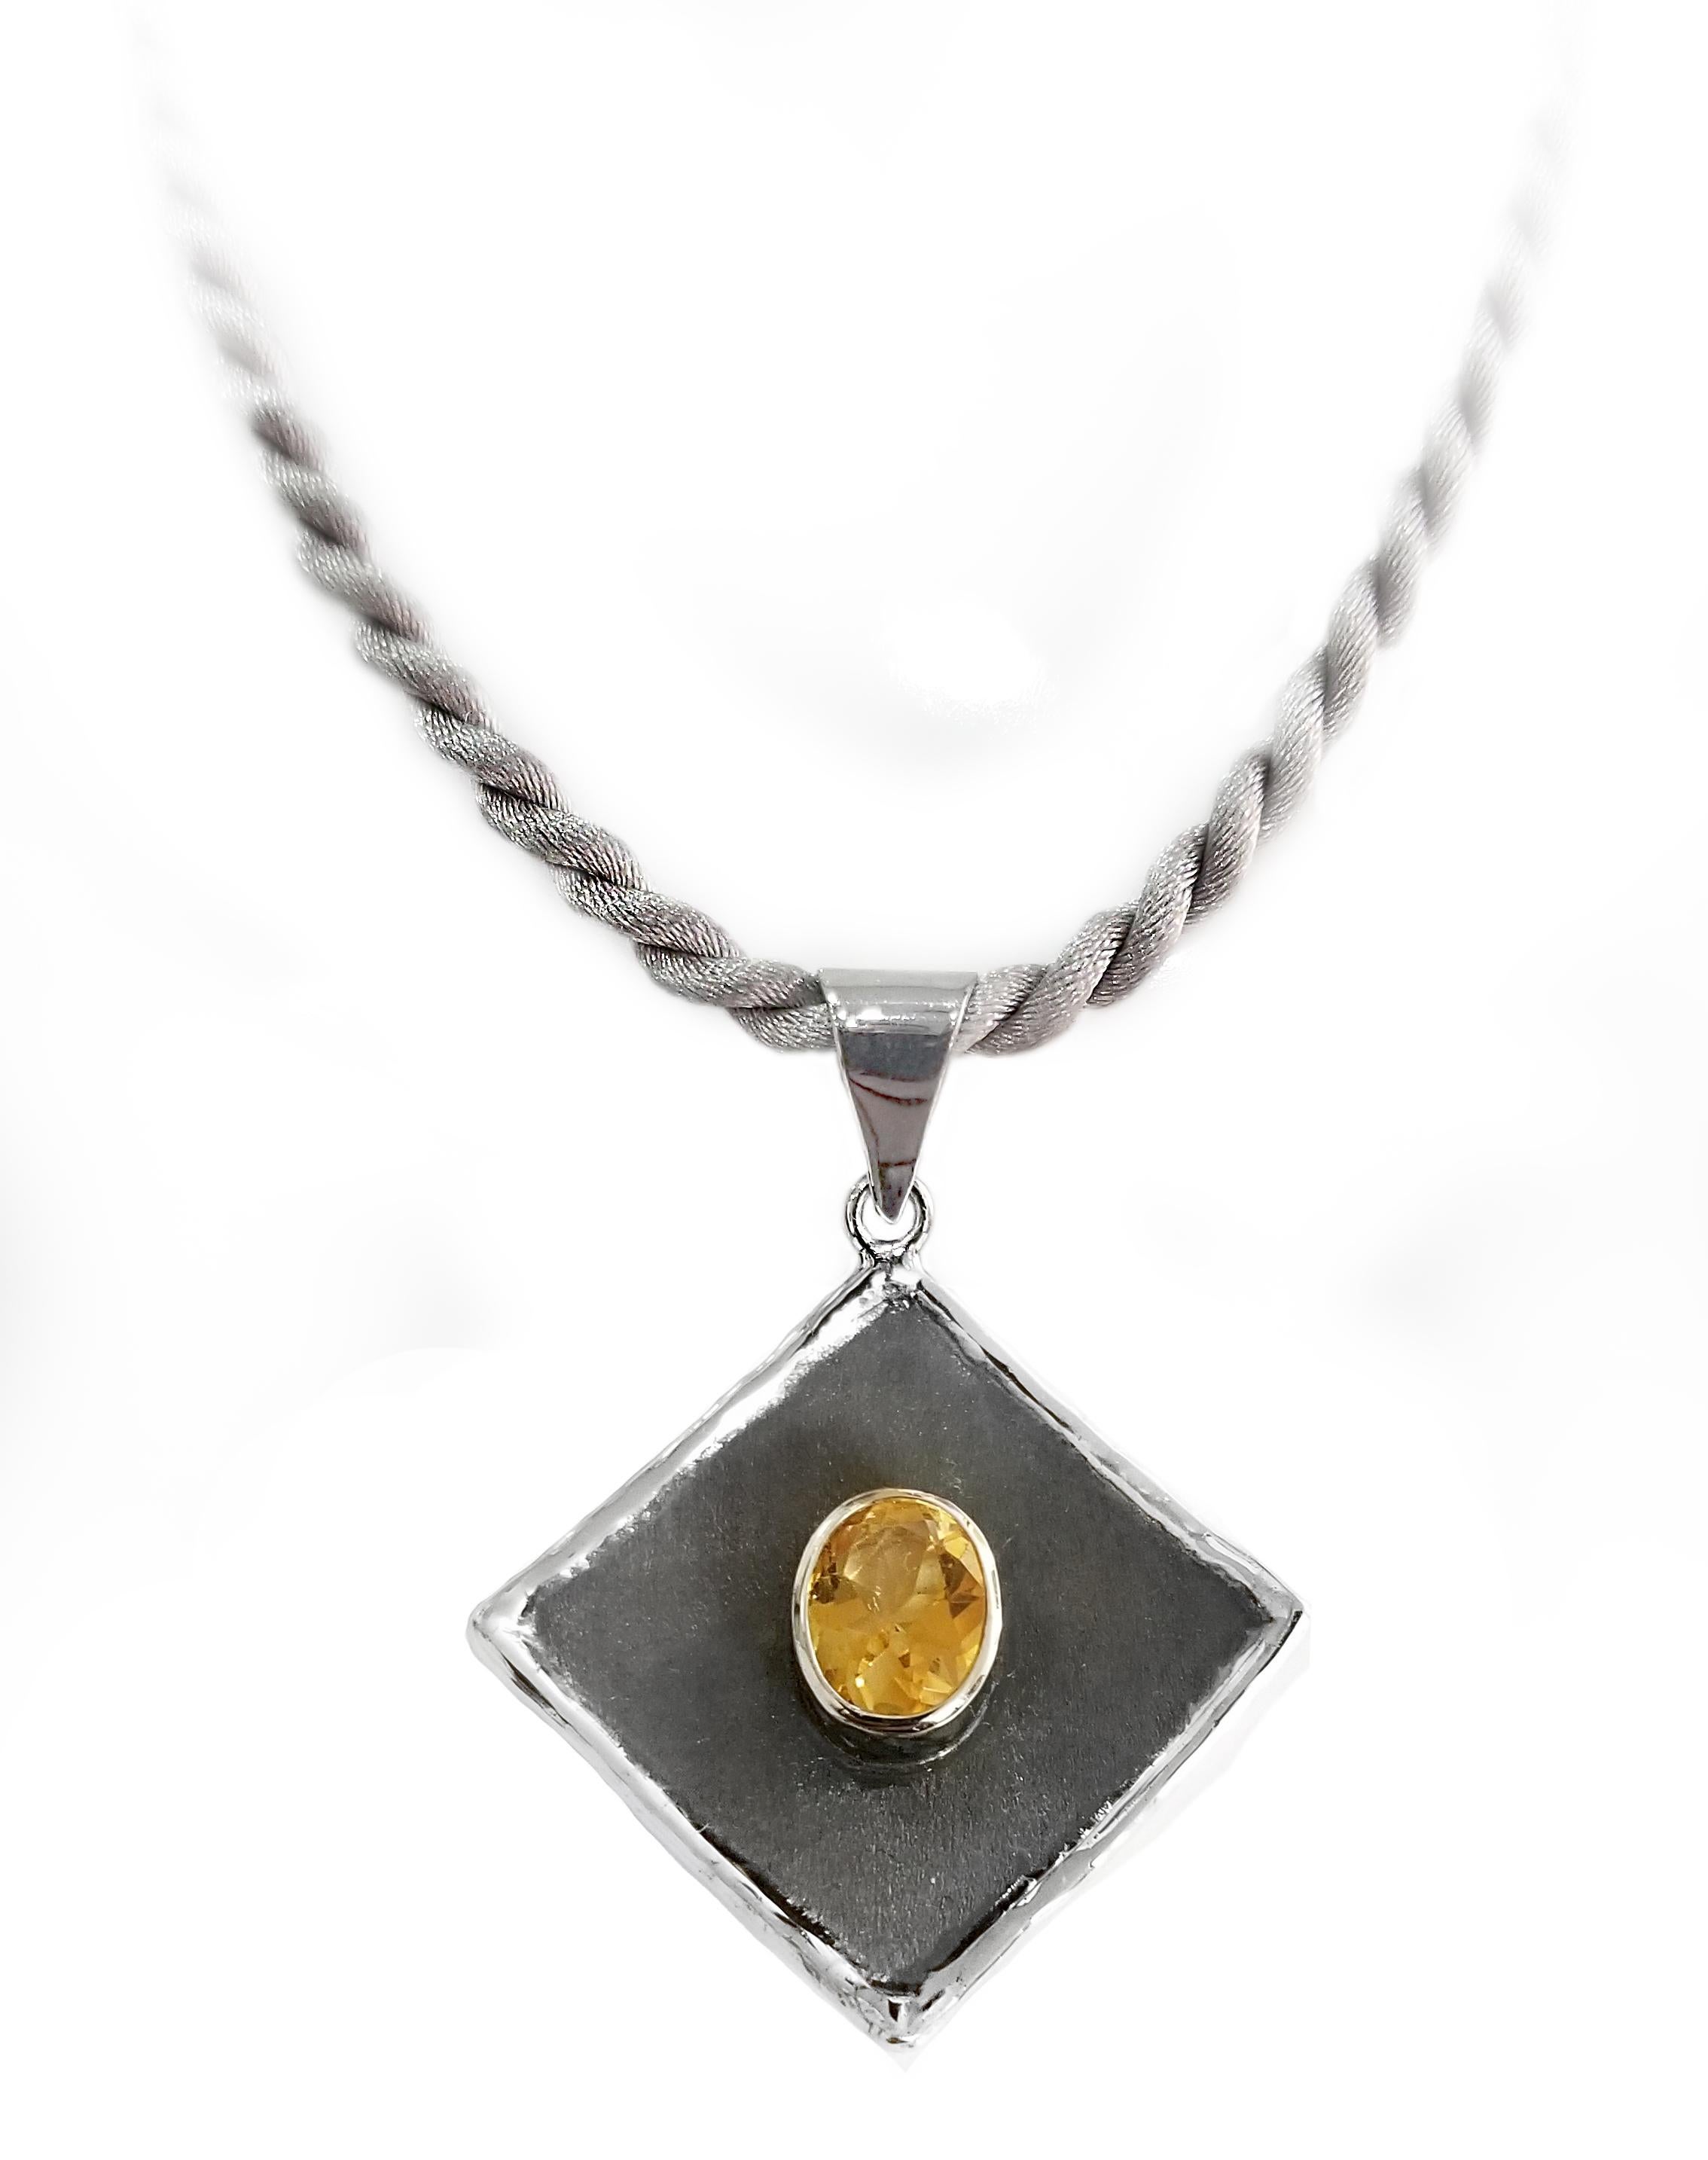 Yianni Creations Hephestos Collection 100% Handmade Artisan Pendant from Fine Silver featuring 1.75 Carat Oval Cut Citrine contrasting on Black Oxidized background. The gem gets complemented by the unique techniques of craftsmanship - brushed